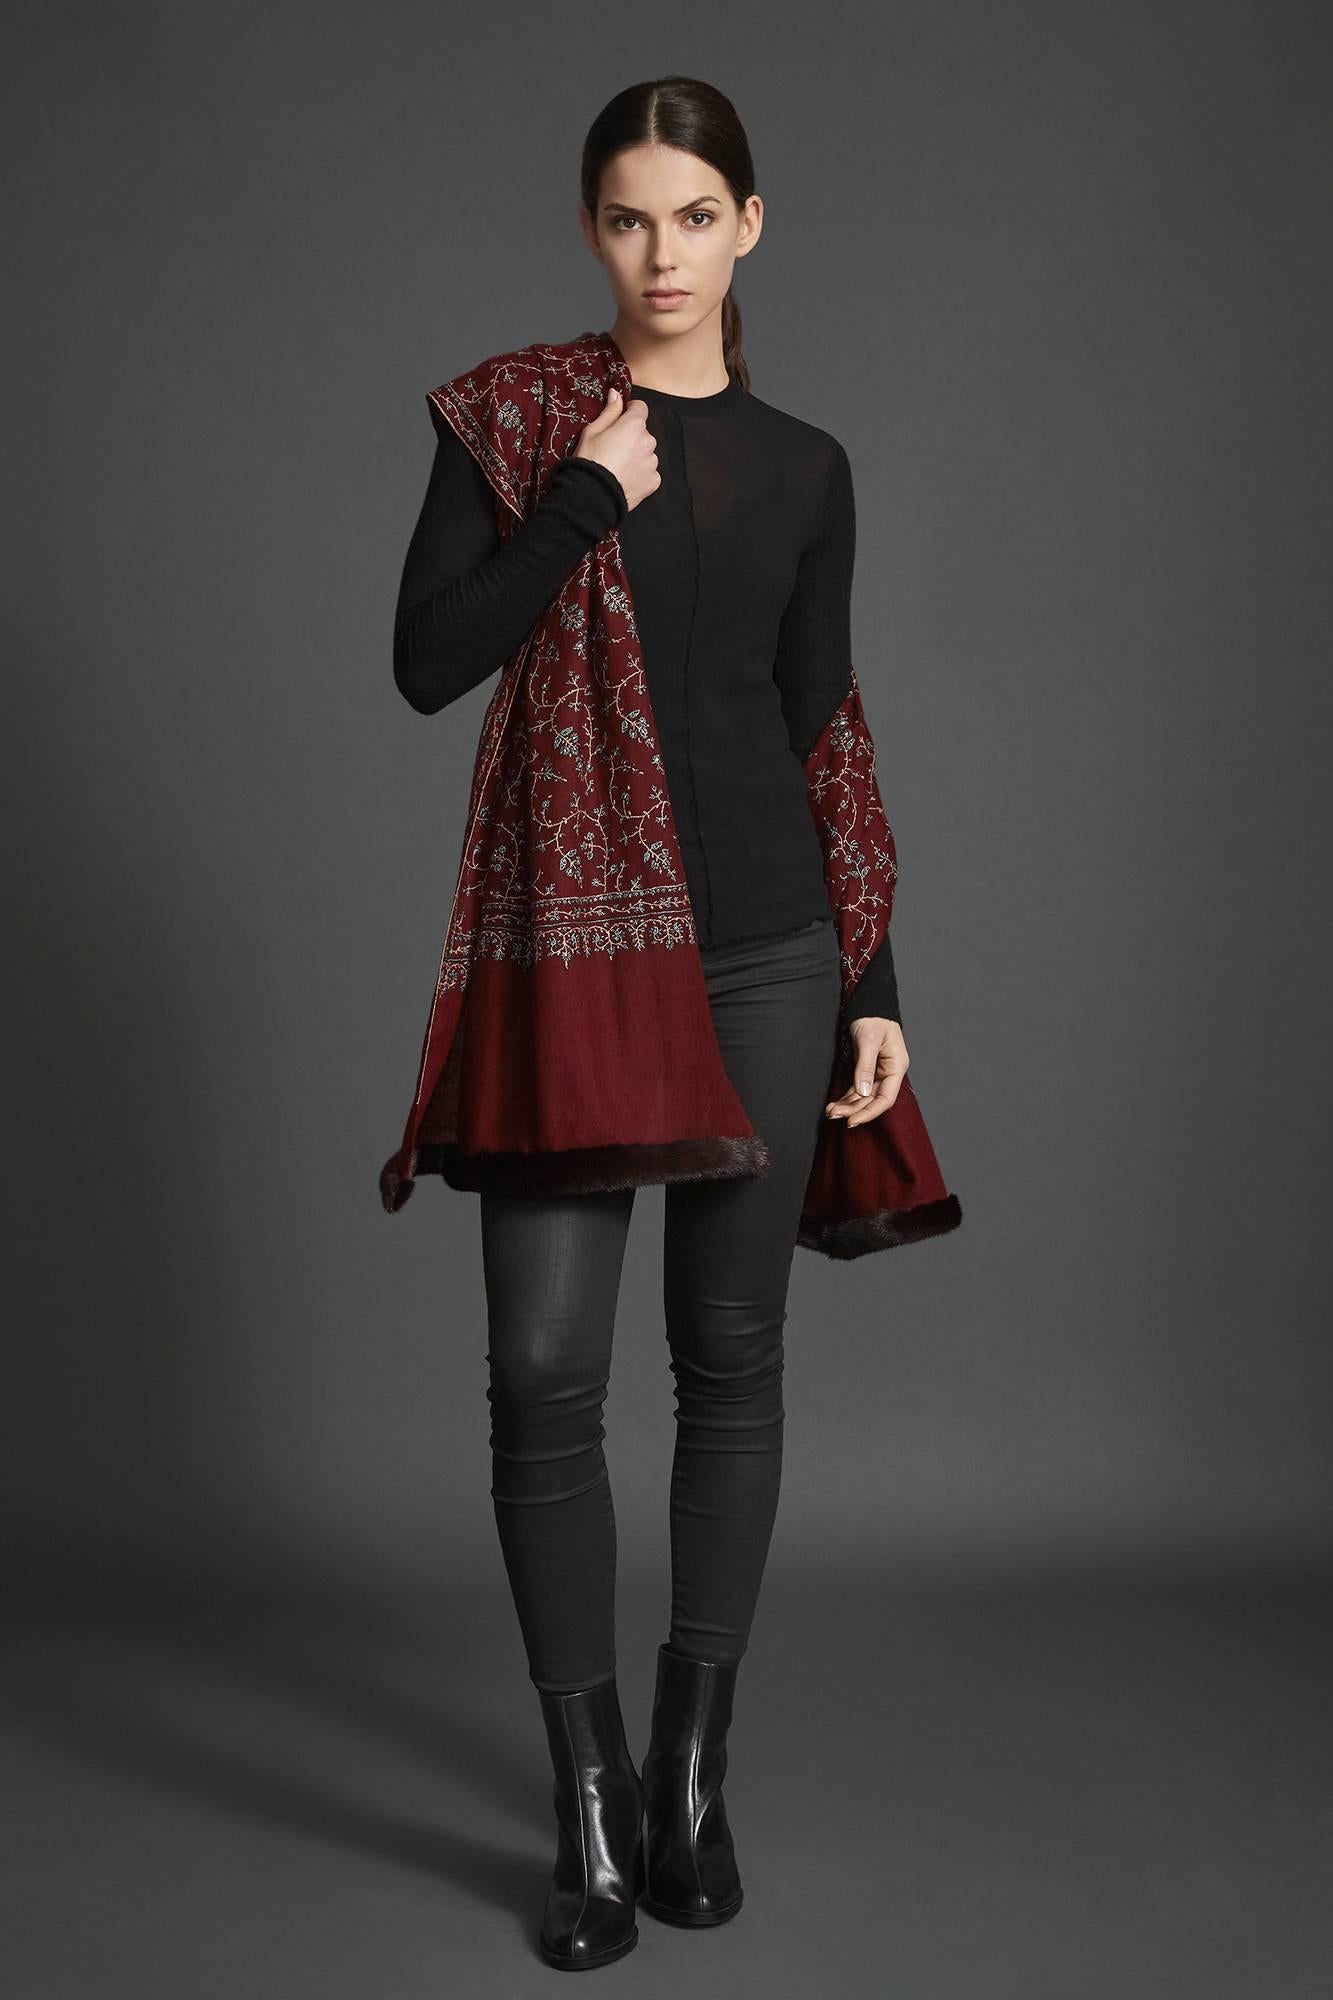 Limited Edition Verheyen London Hand Embroidered Kashmiri 100% Cashmere Mink Trimmed Shawl
Brand New - Burgundy Mink Dyed to Match

Verheyen London’s shawl is spun from the finest embroidered woven 100% cashmere shawl from Kashmir and finished with